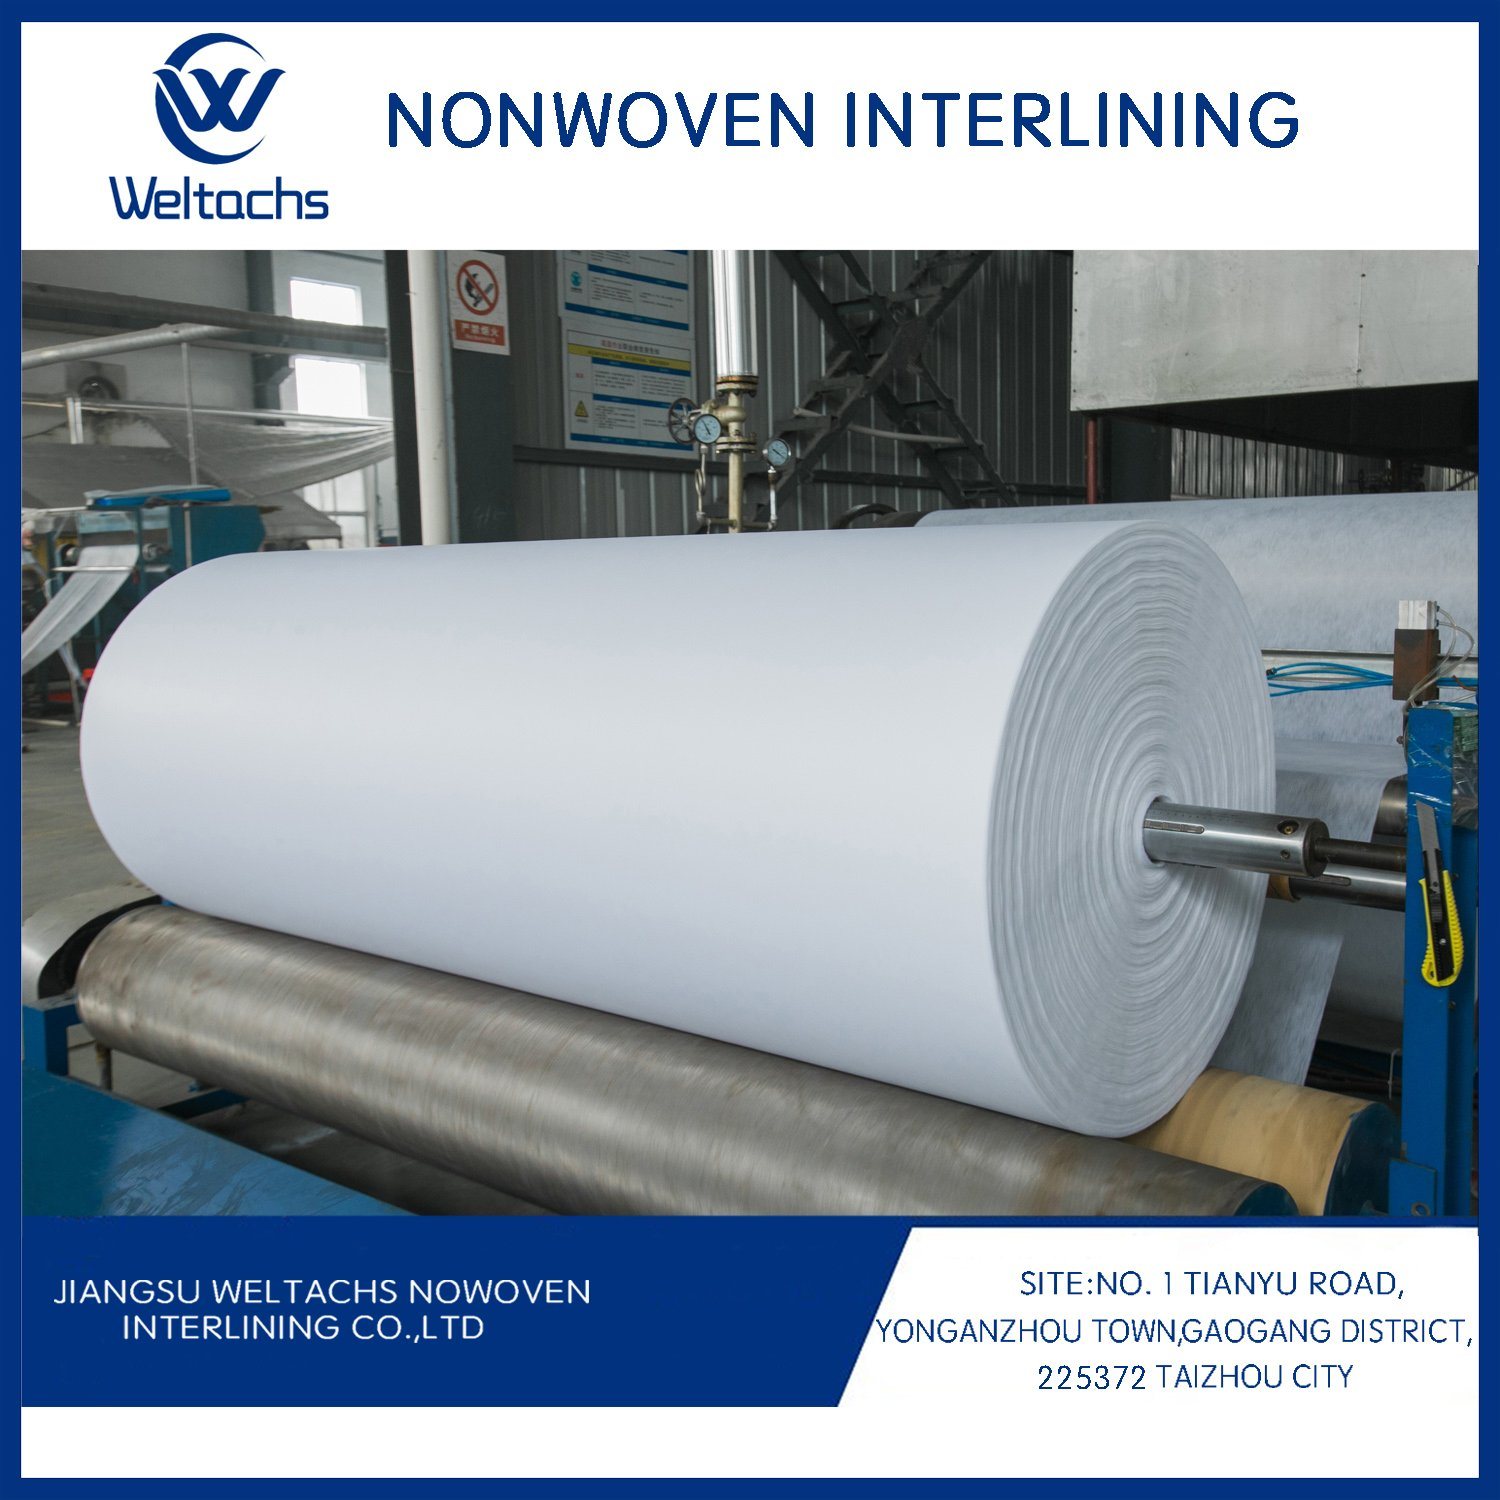 Customize Nonwoven Fusing Interlining Fabric and Adhesive Hot Rolling Interlining Thermo Adhesive Interlining Interfacing